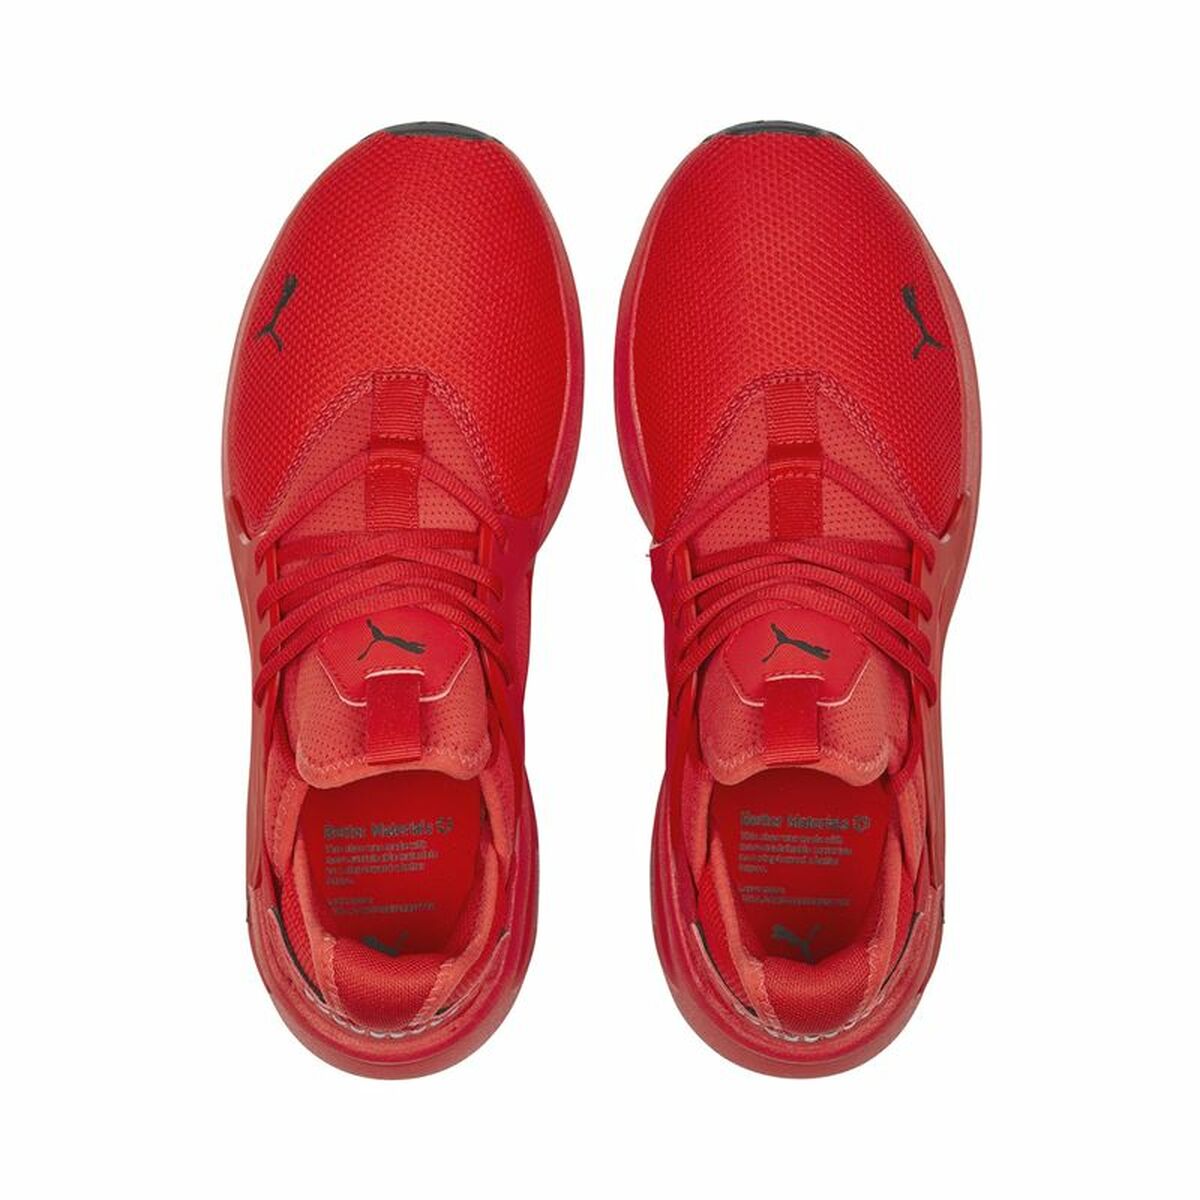 Chaussures de Running pour Adultes Puma Softride Enzo Evo Better Rouge Homme